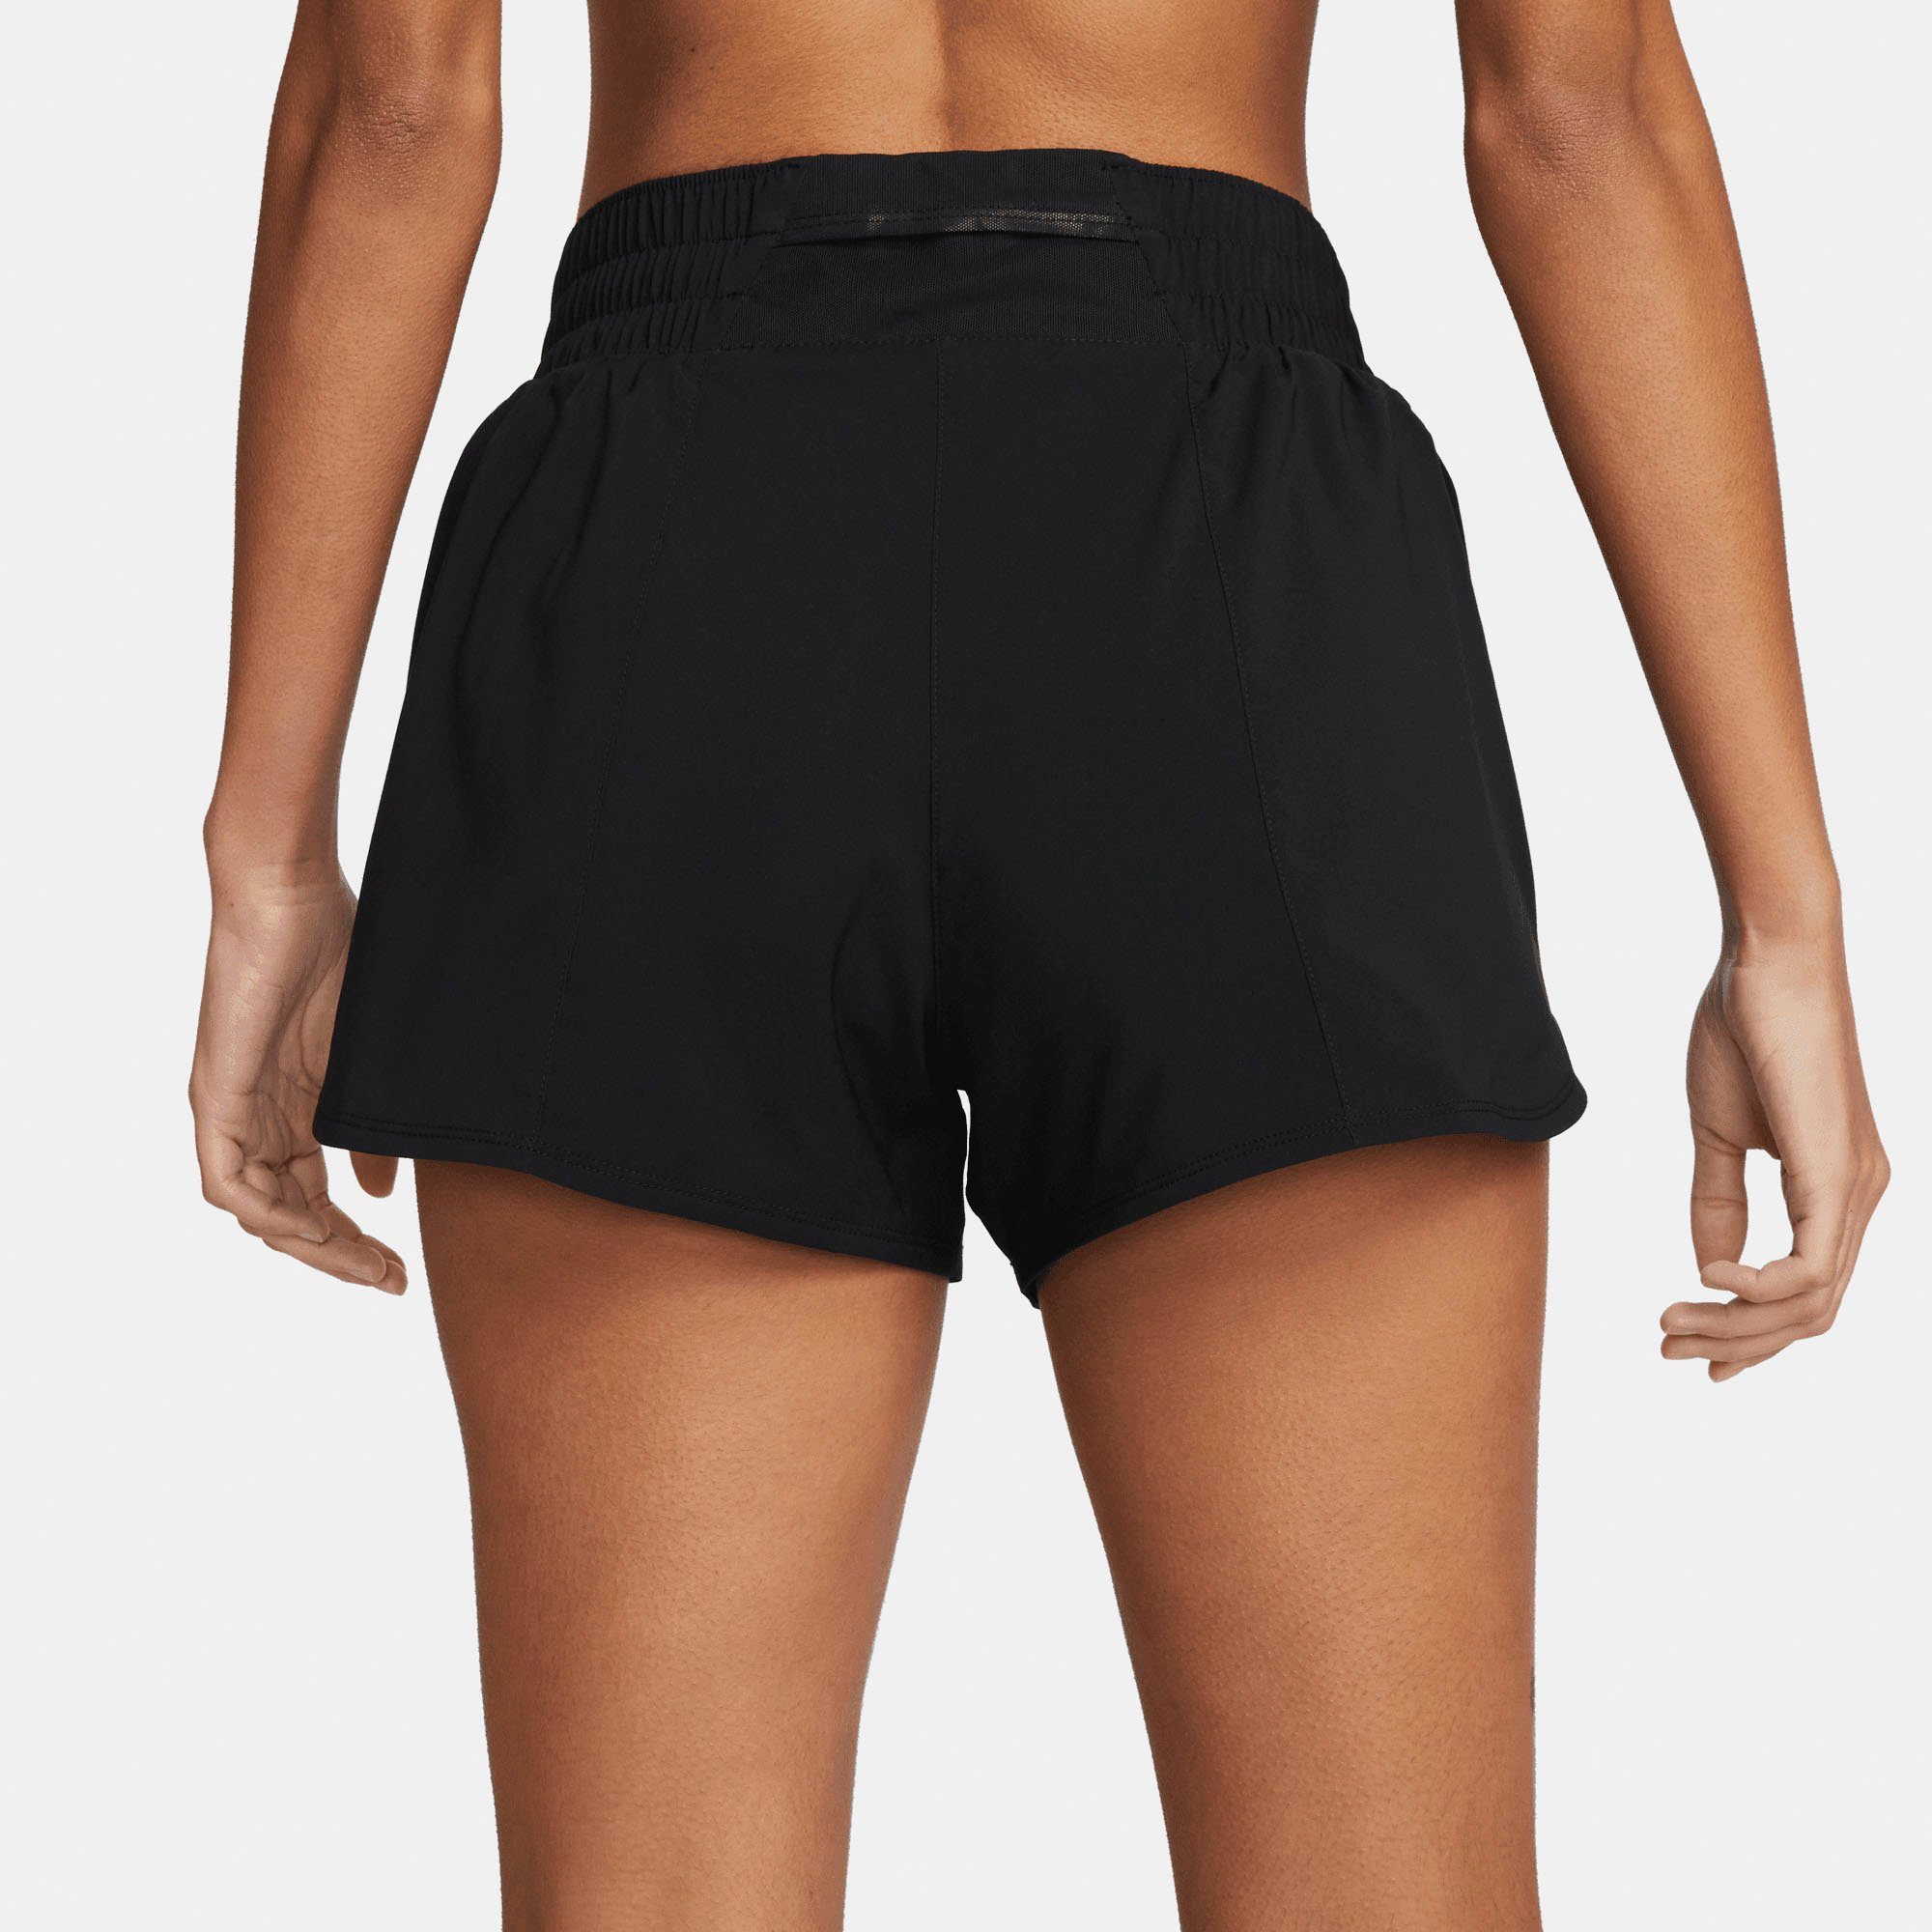 Nike SHORTS SILV MID-RISE ONE WOMEN'S DRI-FIT Trainingsshorts BRIEF-LINED BLACK/REFLECTIVE